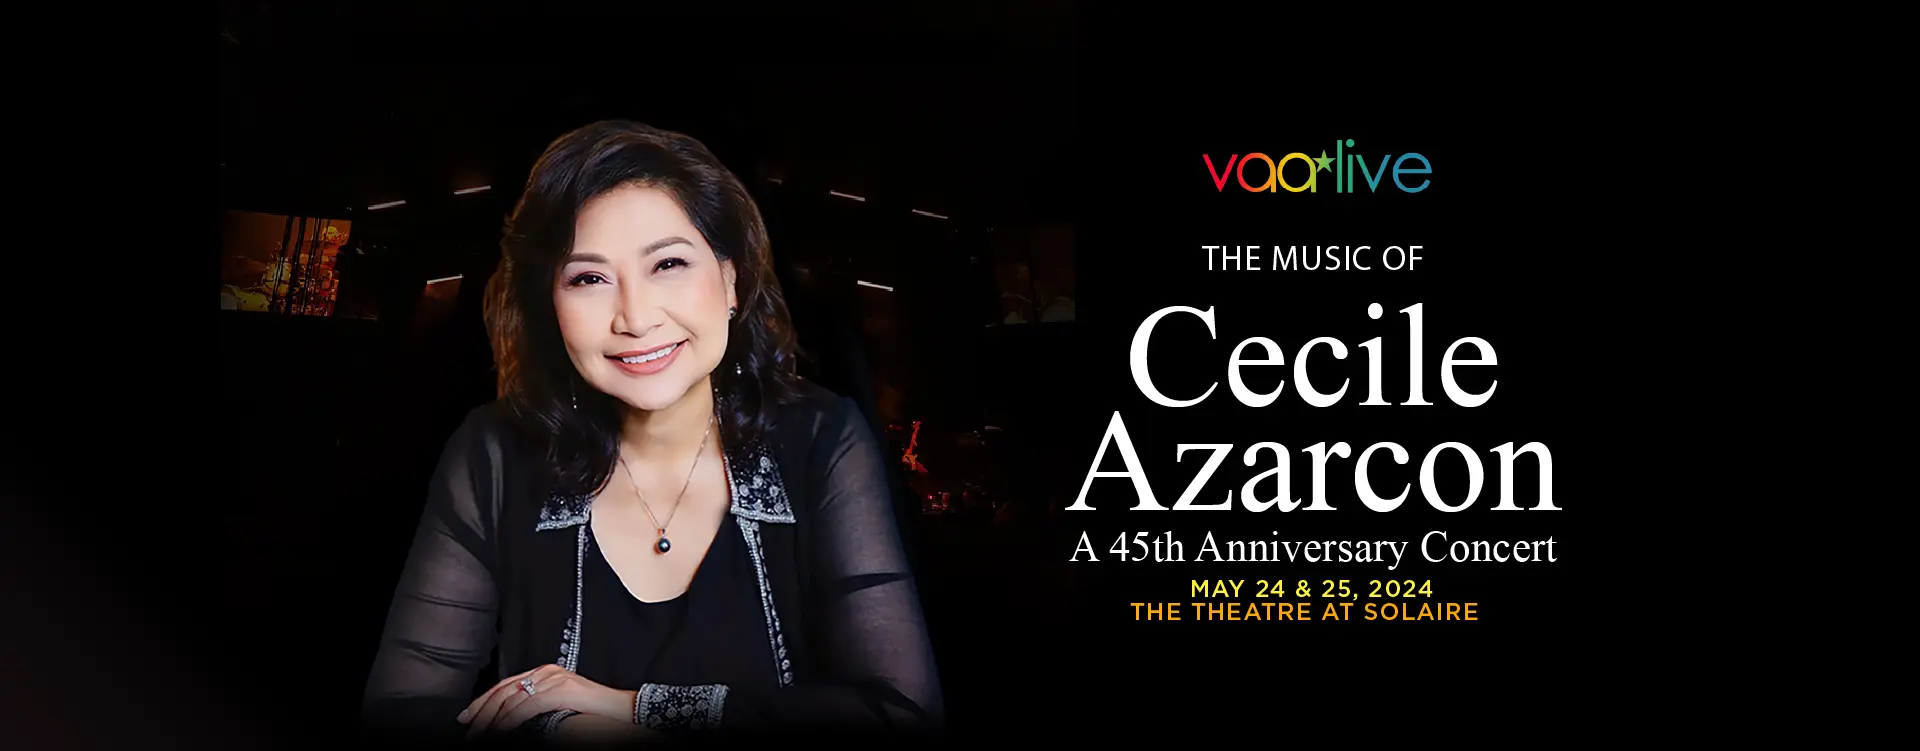 The Music of Cecile Azarcon: A 45th Anniversary Concert